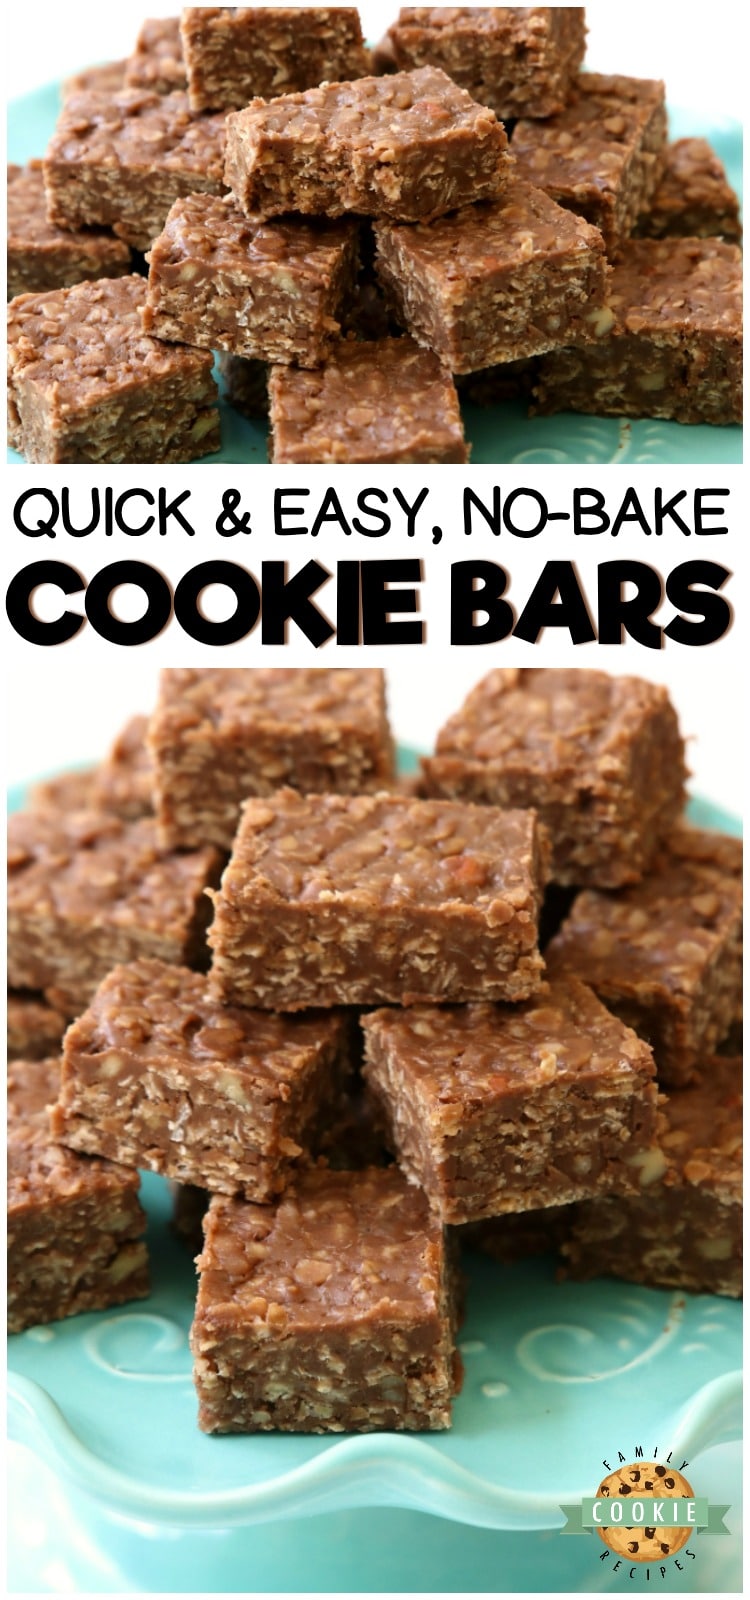 No Bake Cookie Bars recipe is a quick variation on THE BEST no bake cookies recipe. Made with quick oats & chocolate chips, these no bake oatmeal cookies couldn't be tastier! #nobake #cookies #chocolate #dessert #oats #recipe from FAMILY COOKIE RECIPES